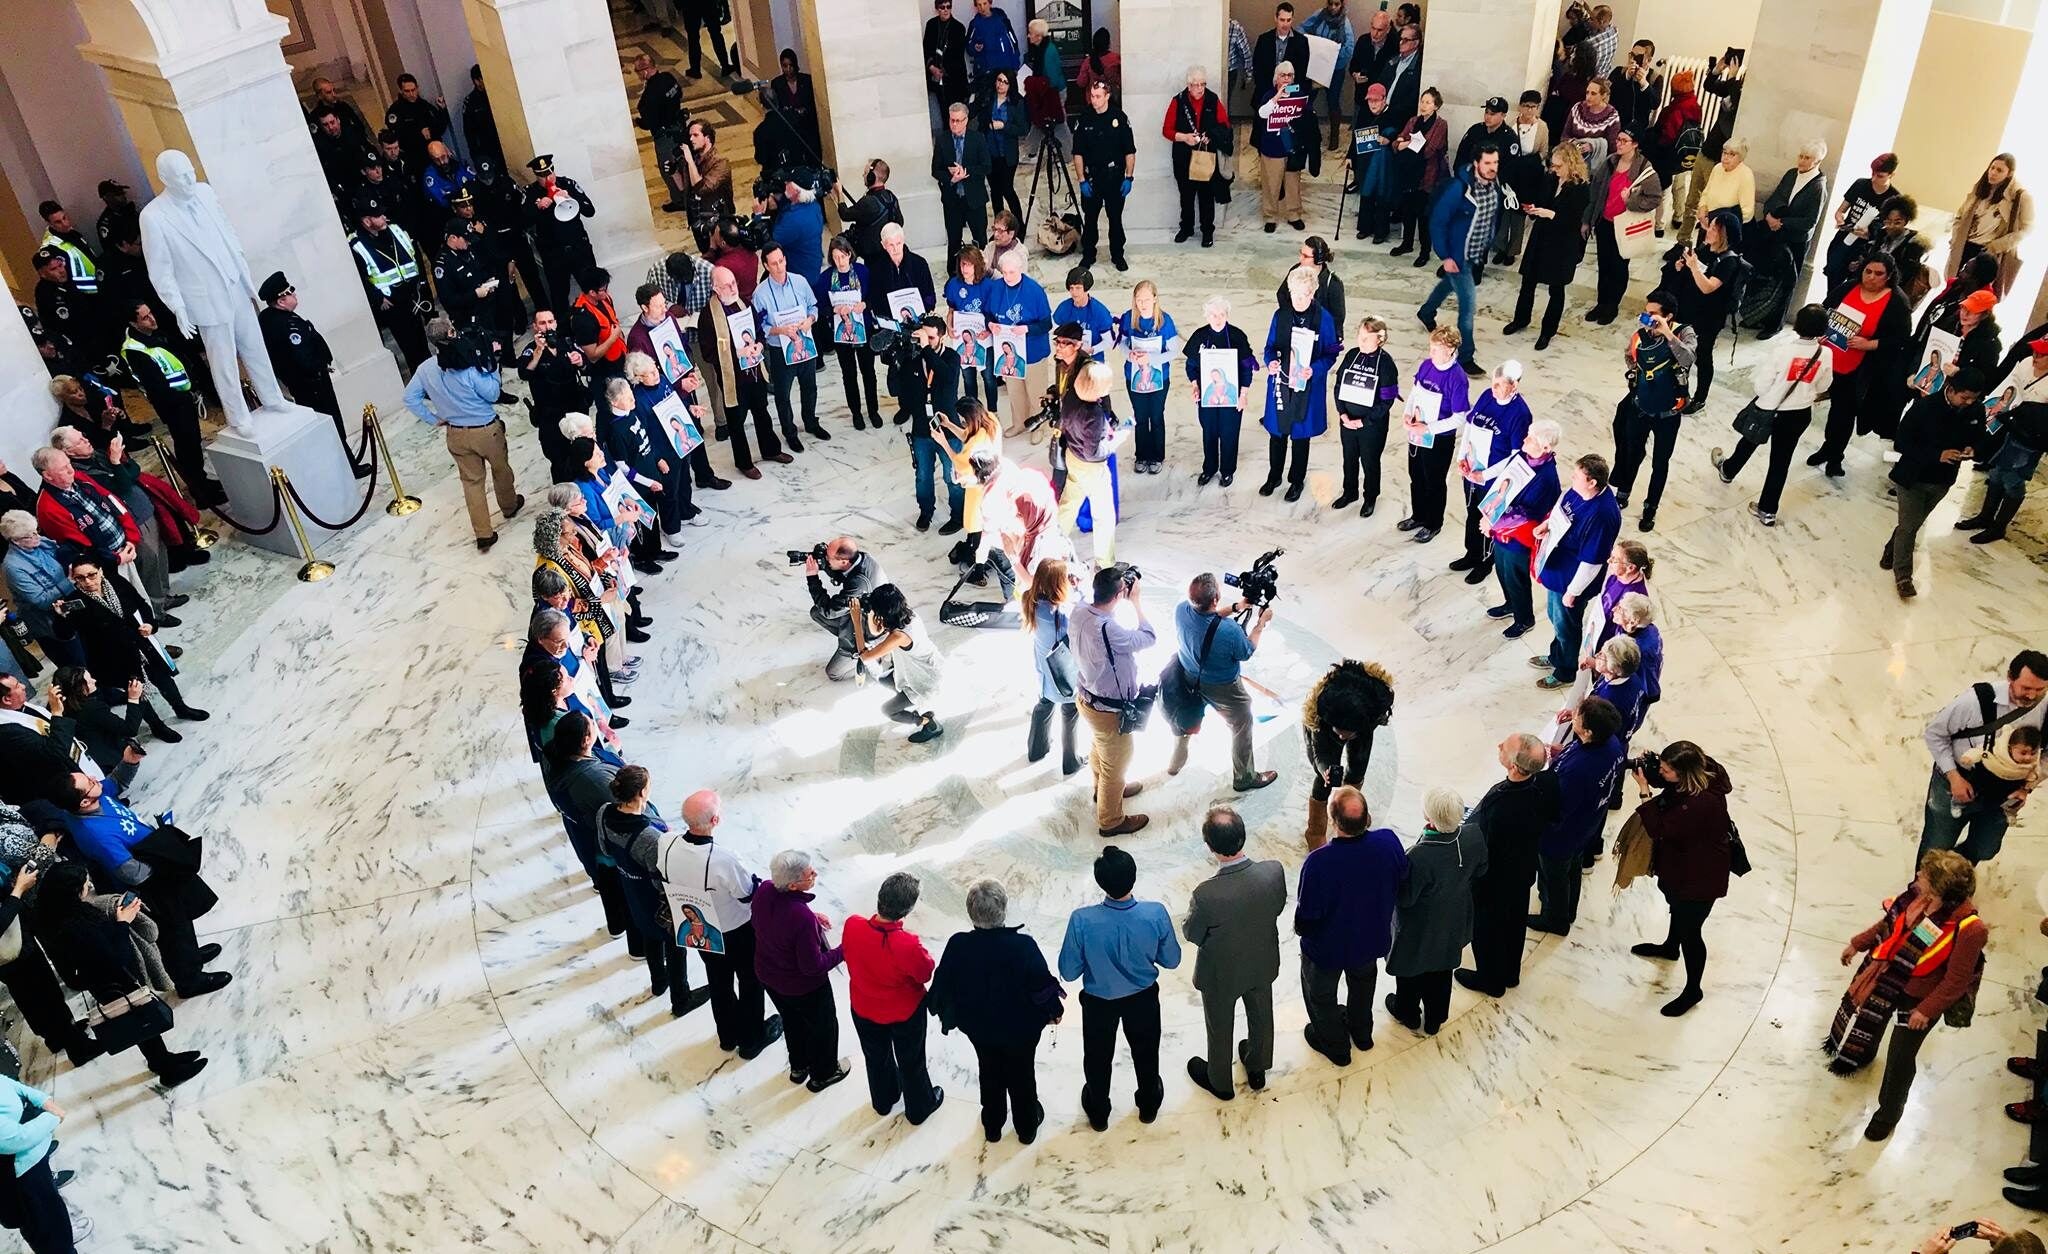 Faith protesters stand in a circle in a government building. Photographers take pictures from inside the circle.